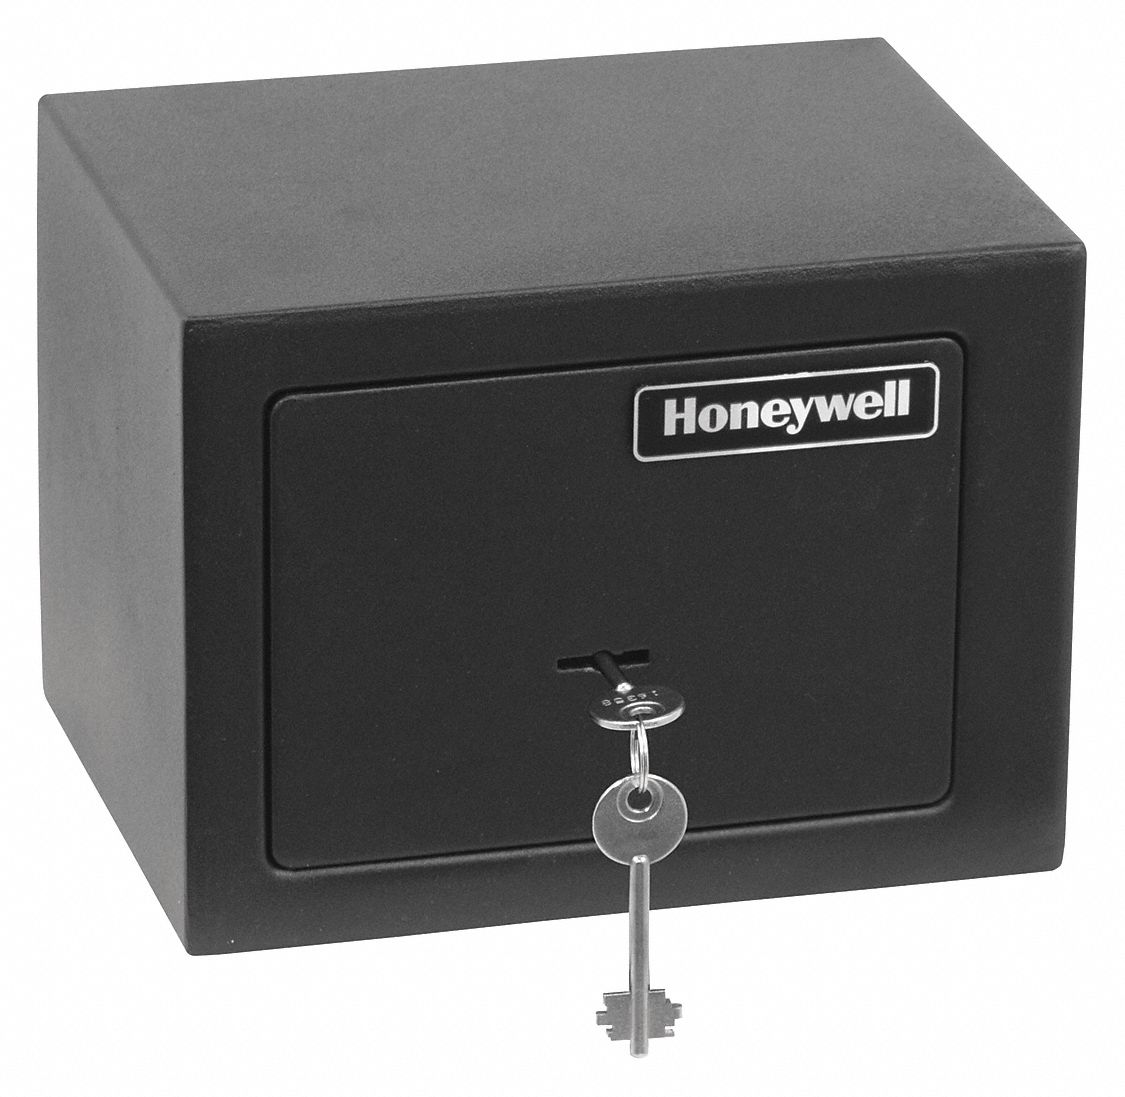 HONEYWELL, Compact and Portable, Key Lock, Security Safe - 52HM75|5002